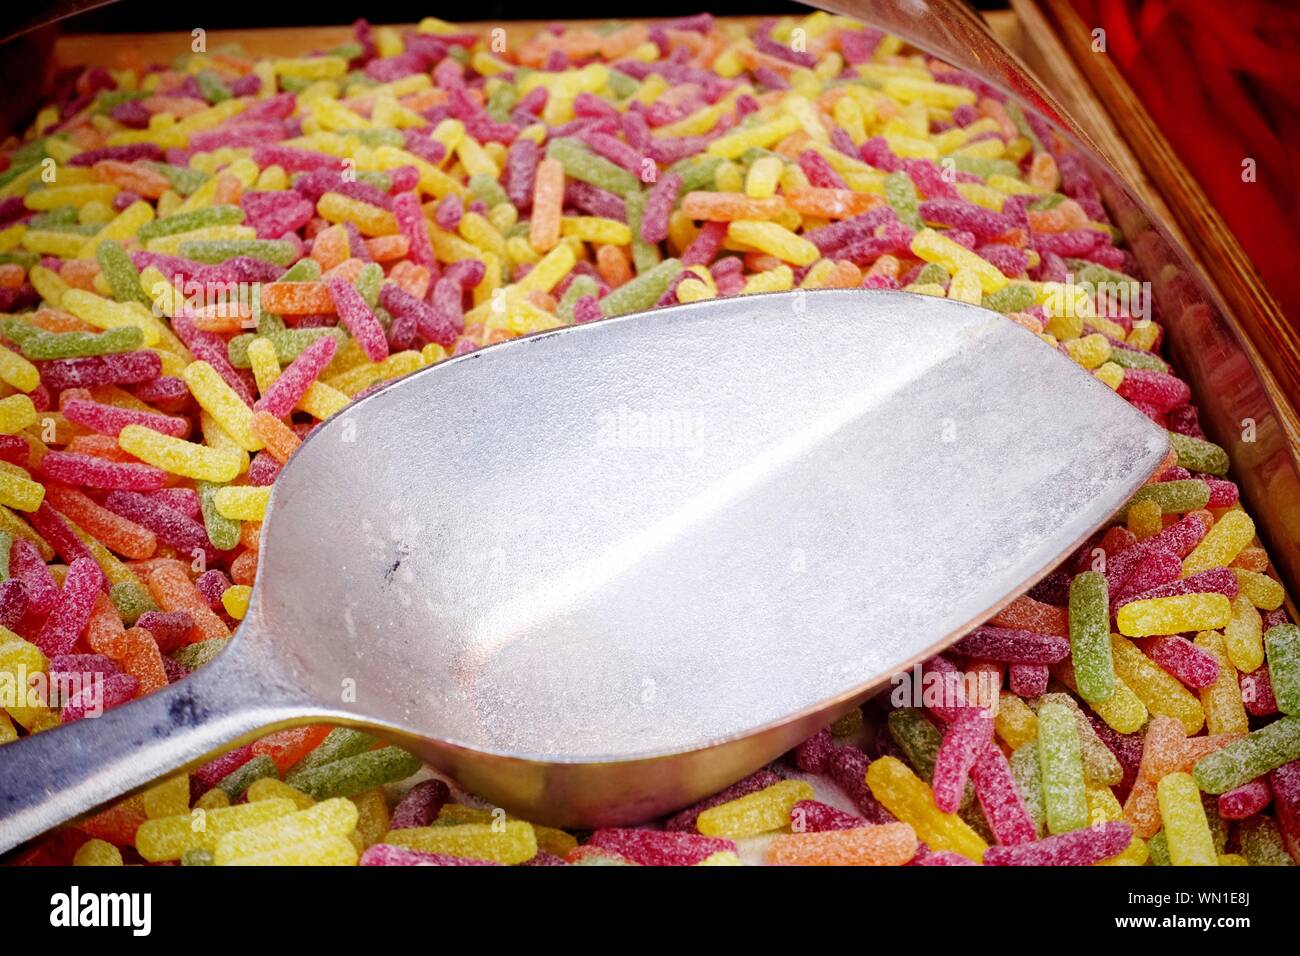 Spatula On Colorful Candies For Sale At Market Stock Photo